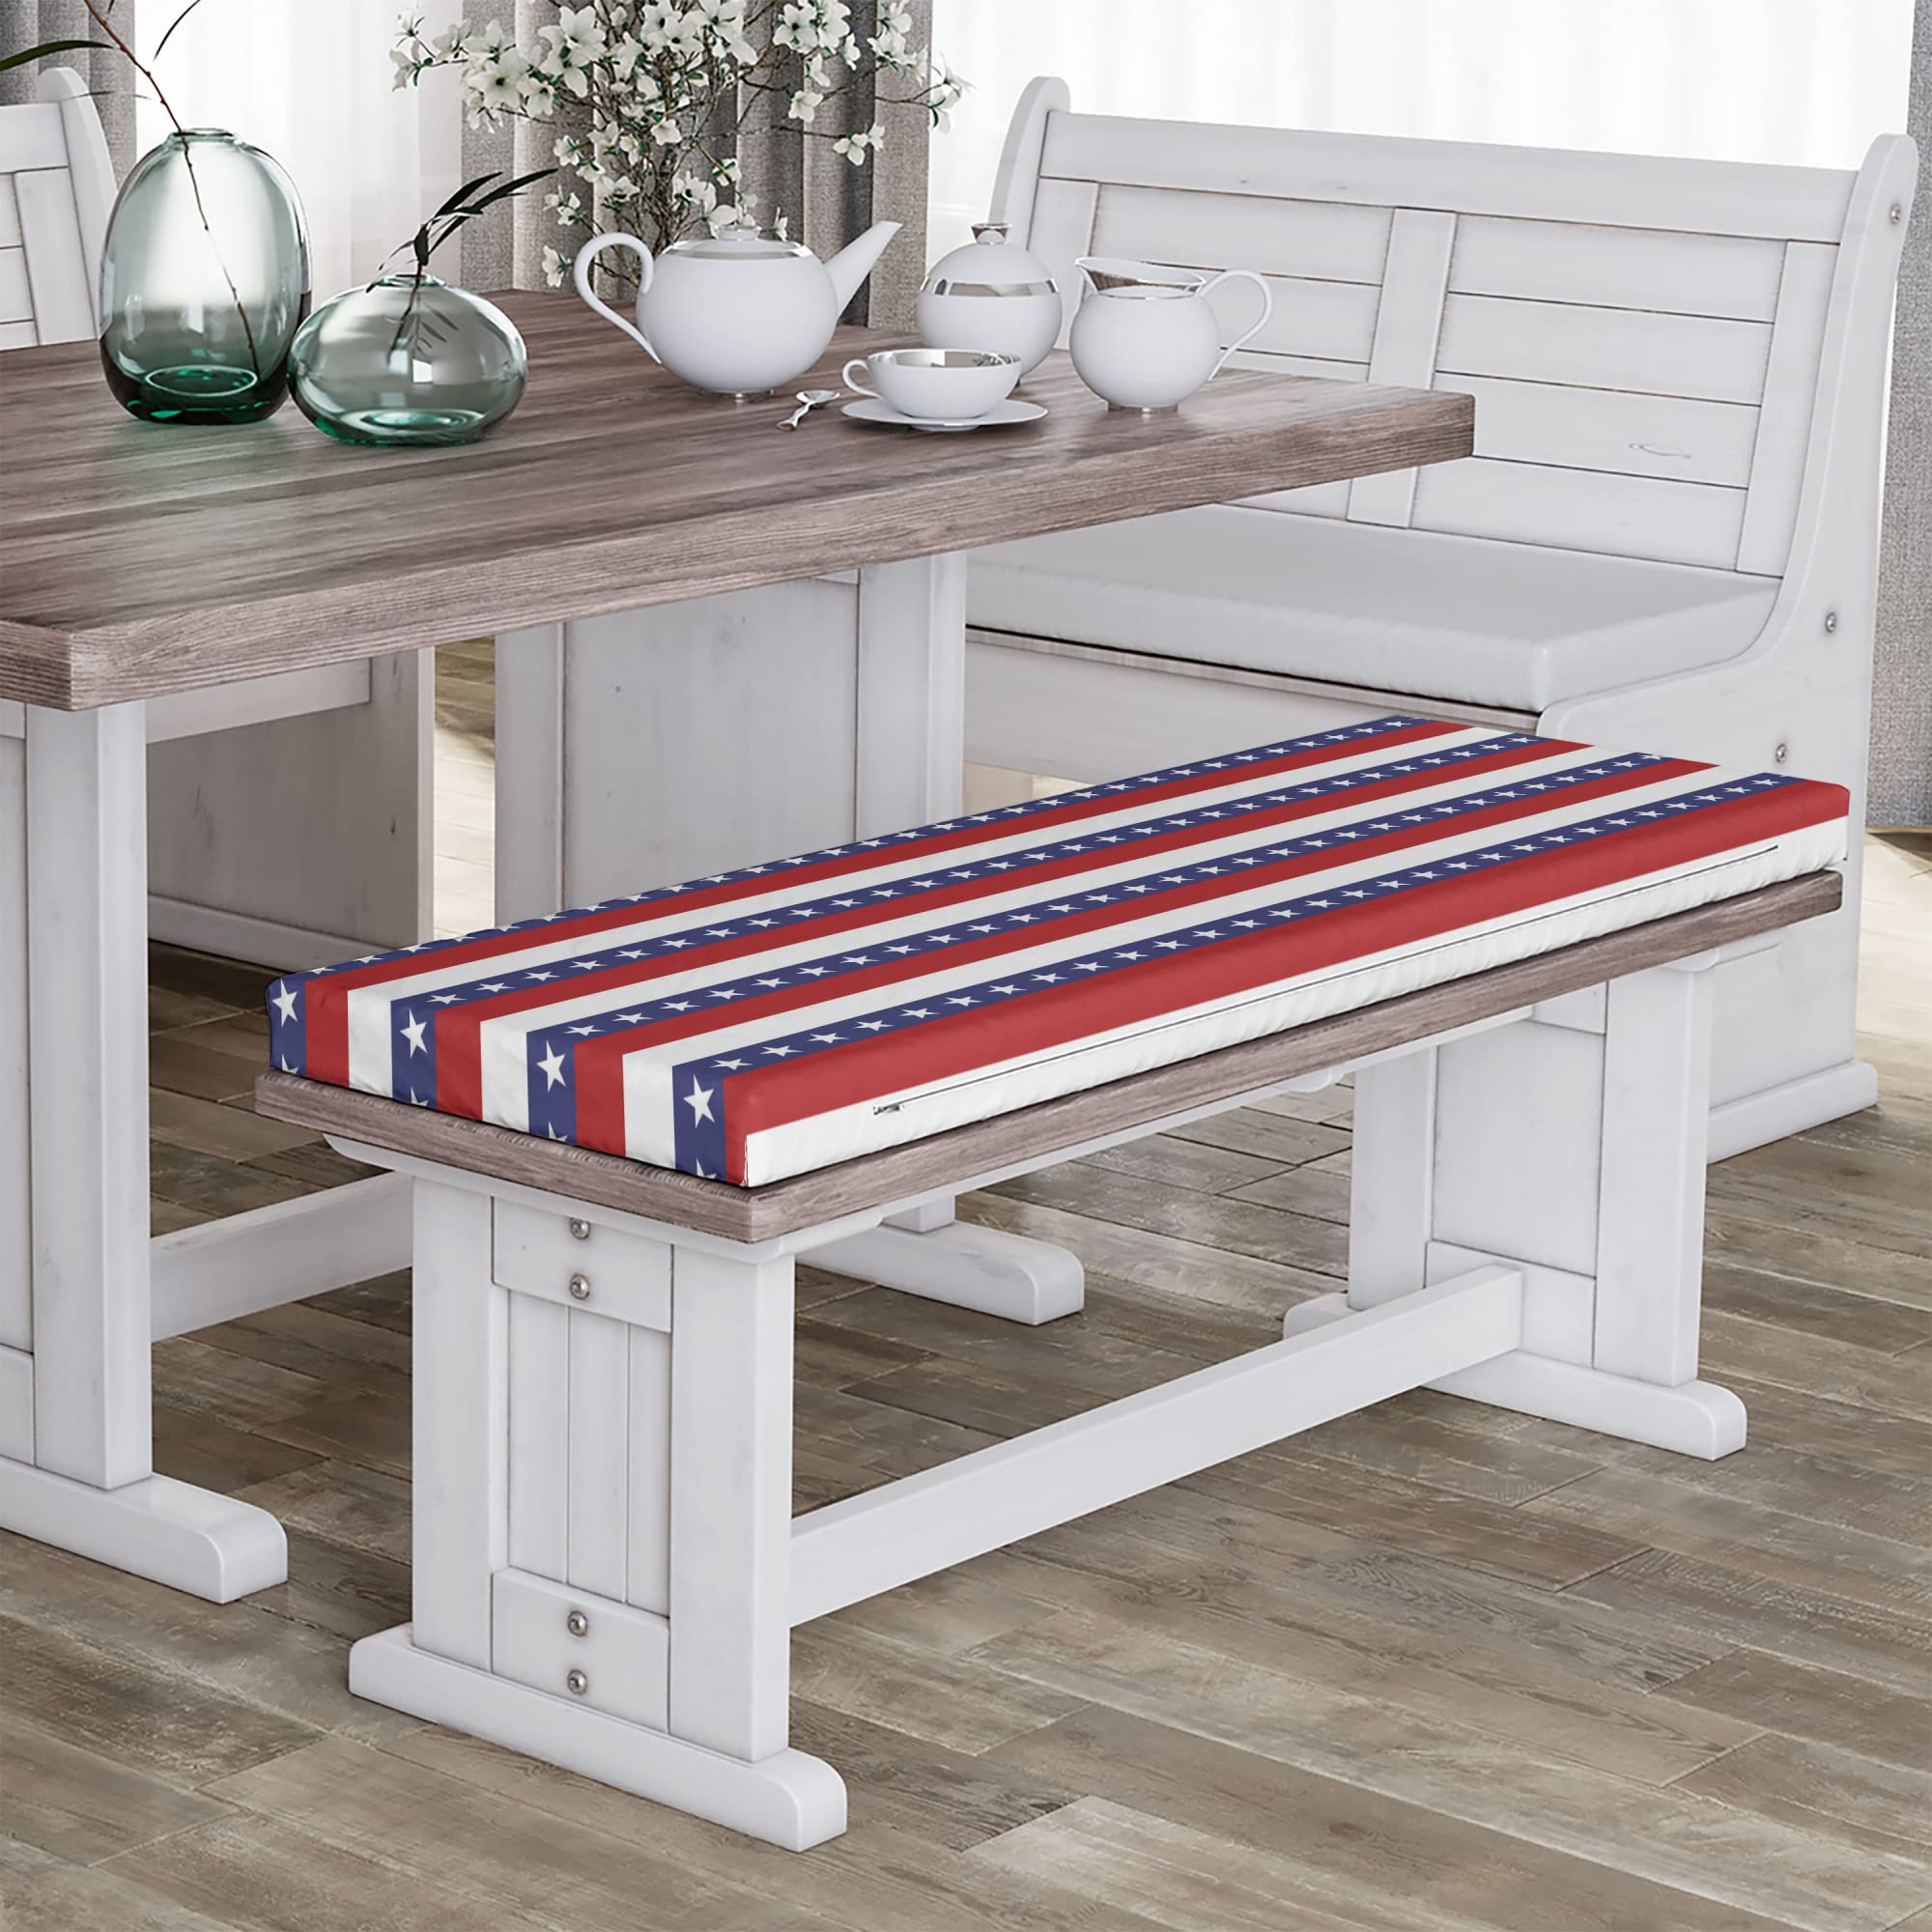 Ambesonne 4th of July Bench Cushion, Stars and Stripes Pattern American Flag Inspired Patriotic Theme, Standard Size Foam Pad with Decorative Fabric Cover, 45" x 15" x 2", White Blue